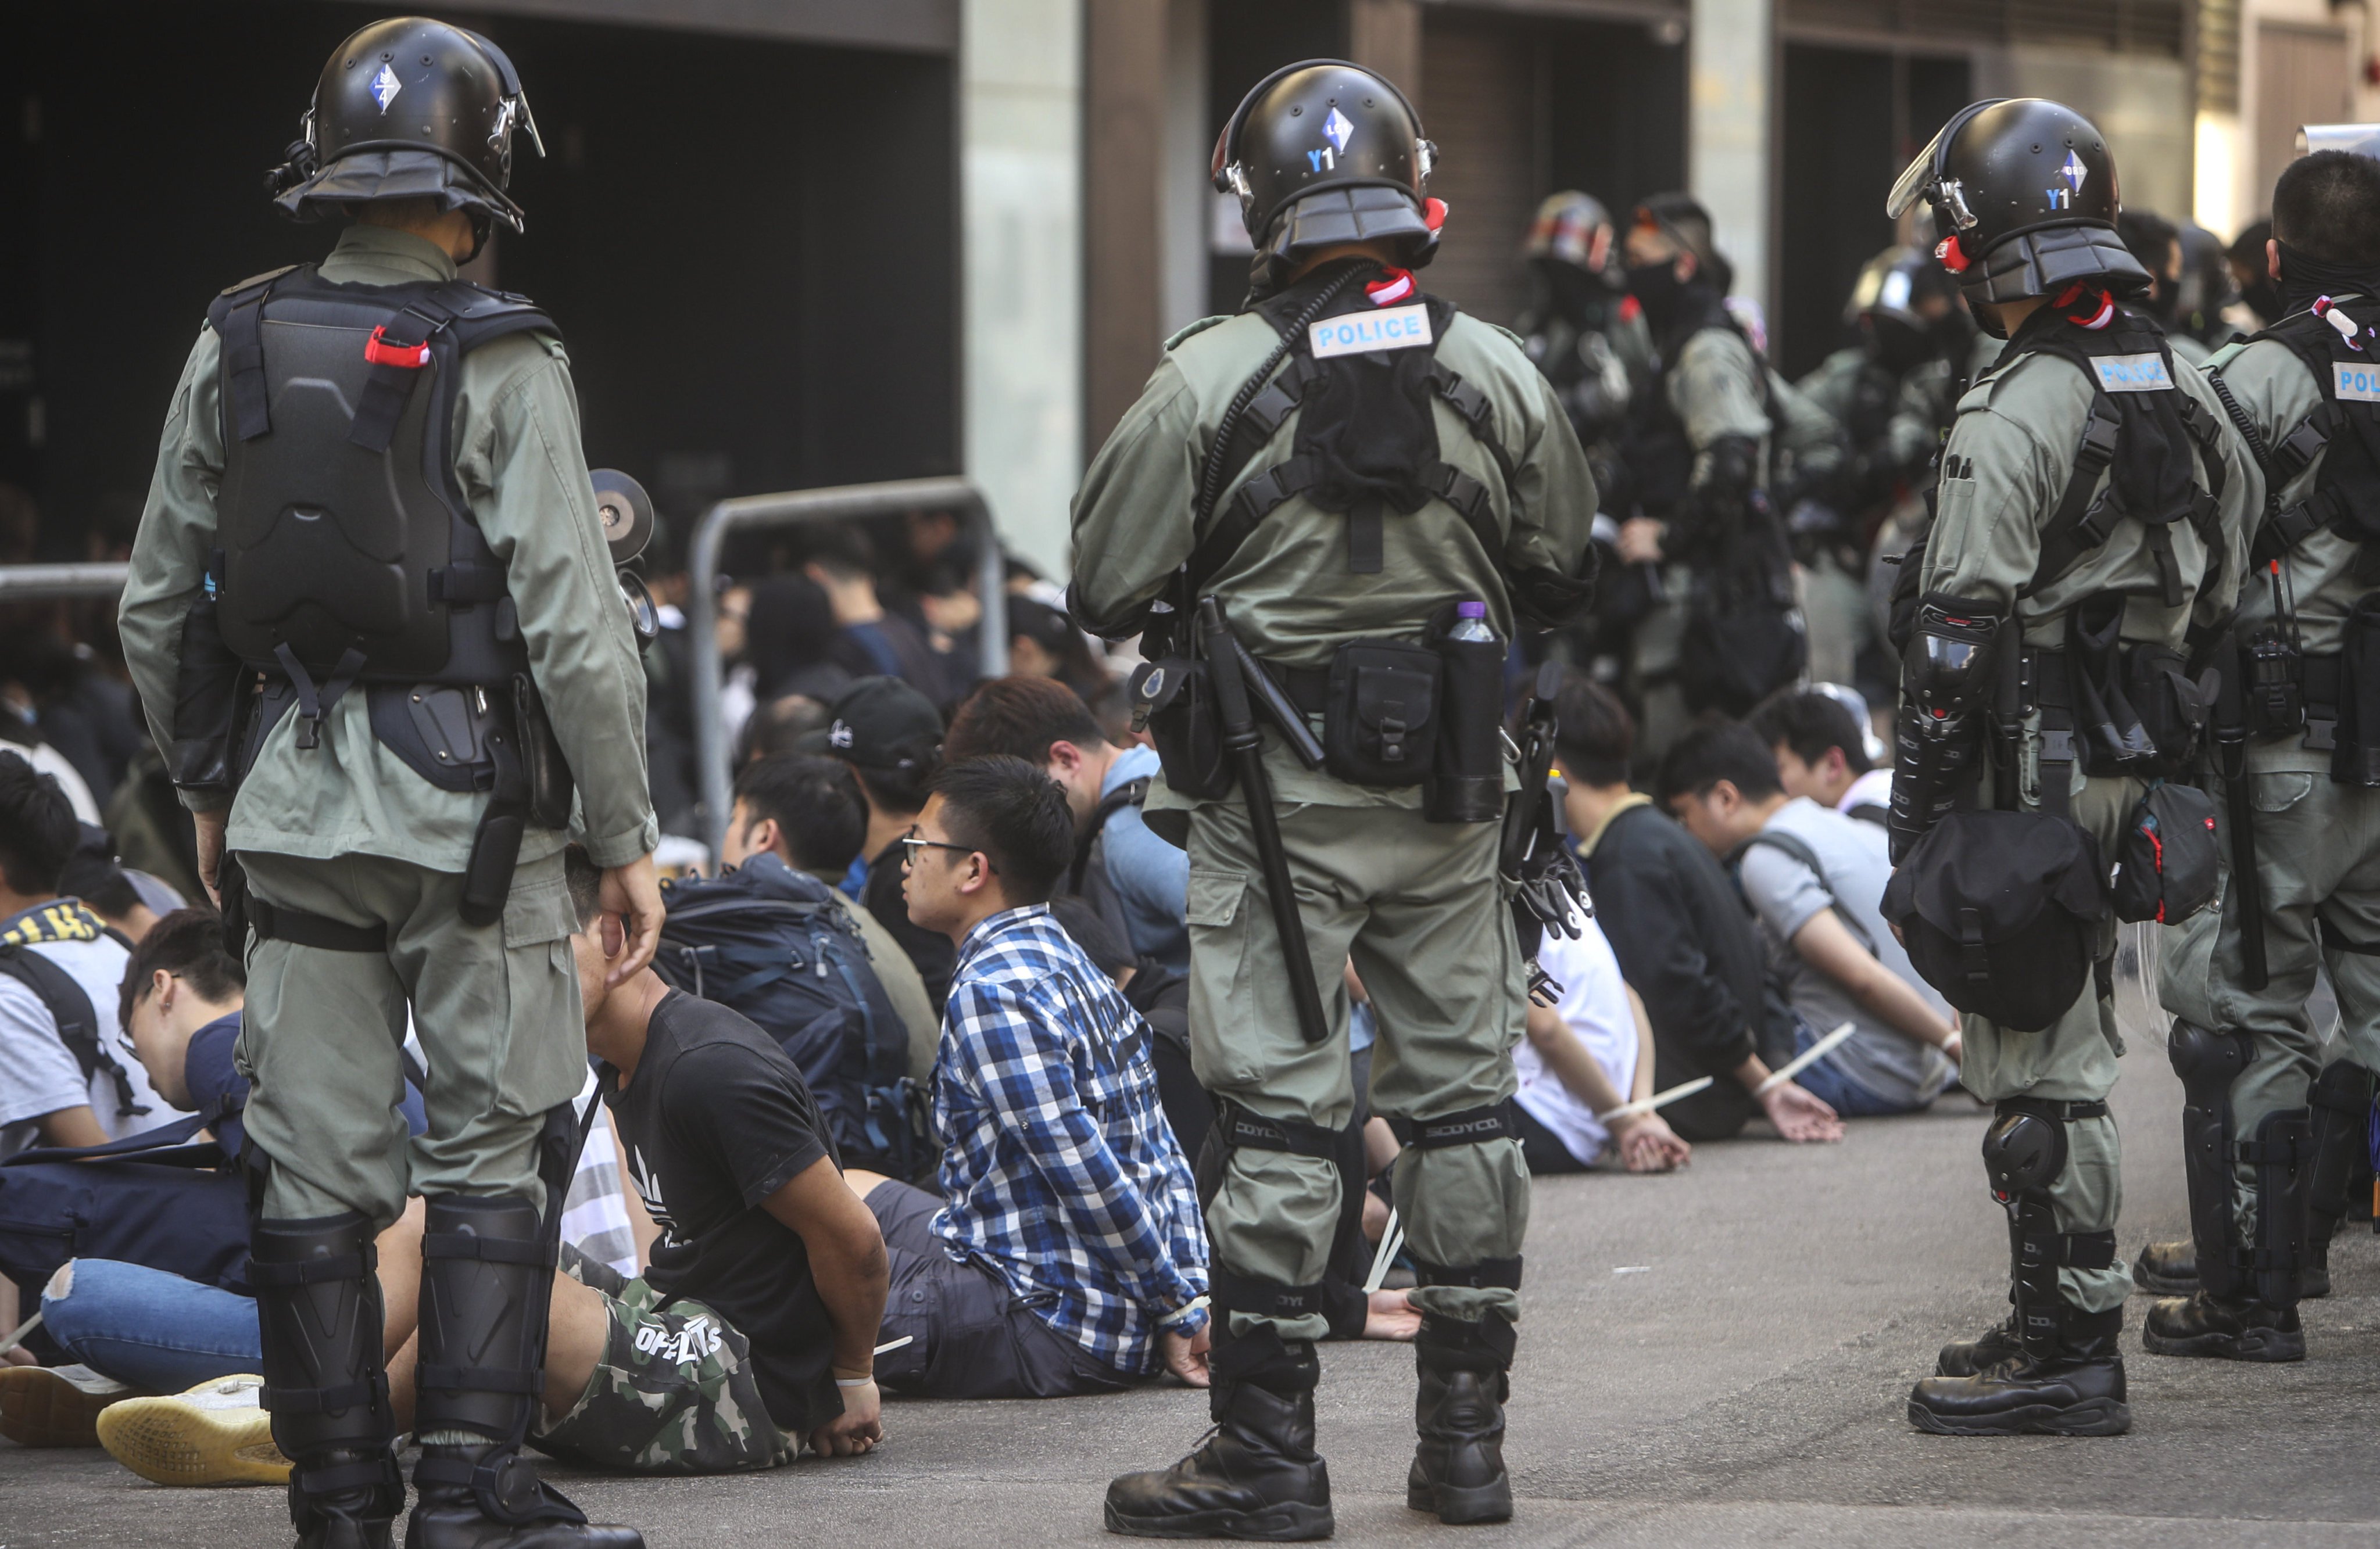 Riot police make arrests after clashes with protesters at Polytechnic University in Hung Hom in November 2019. Photo: Winson Wong